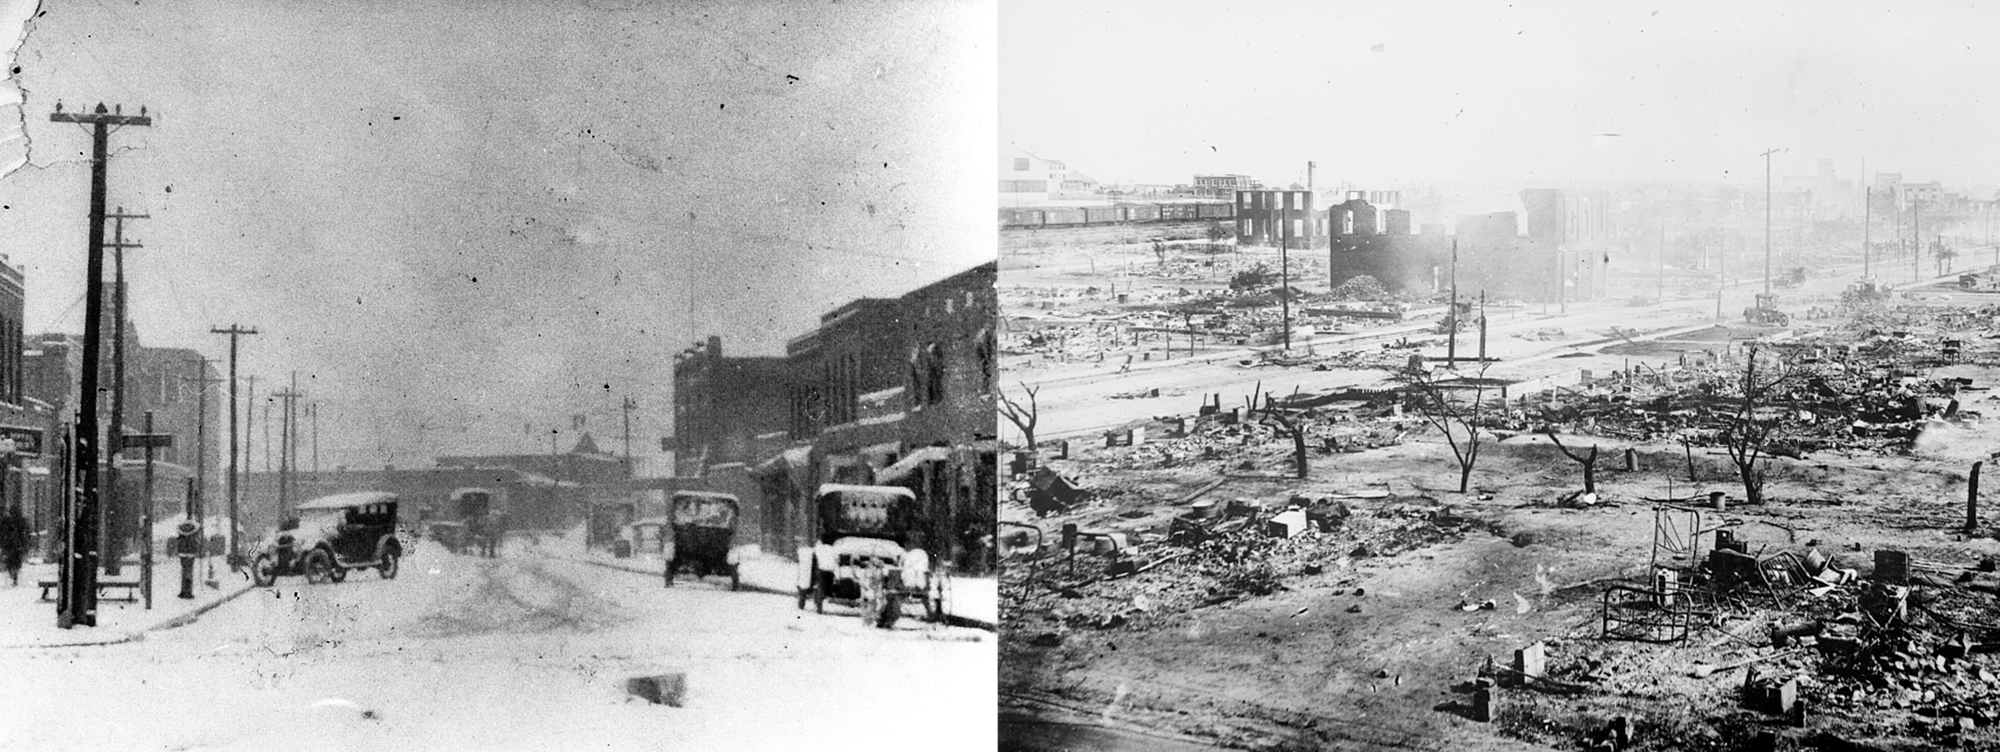 On the left, an image shows what the Greenwood district looked like before mobs of white men burned it to the ground on May 31 and June 1, 1921. On the right, an aerial view of the ruins after the Tulsa Race Massacre. May 2021